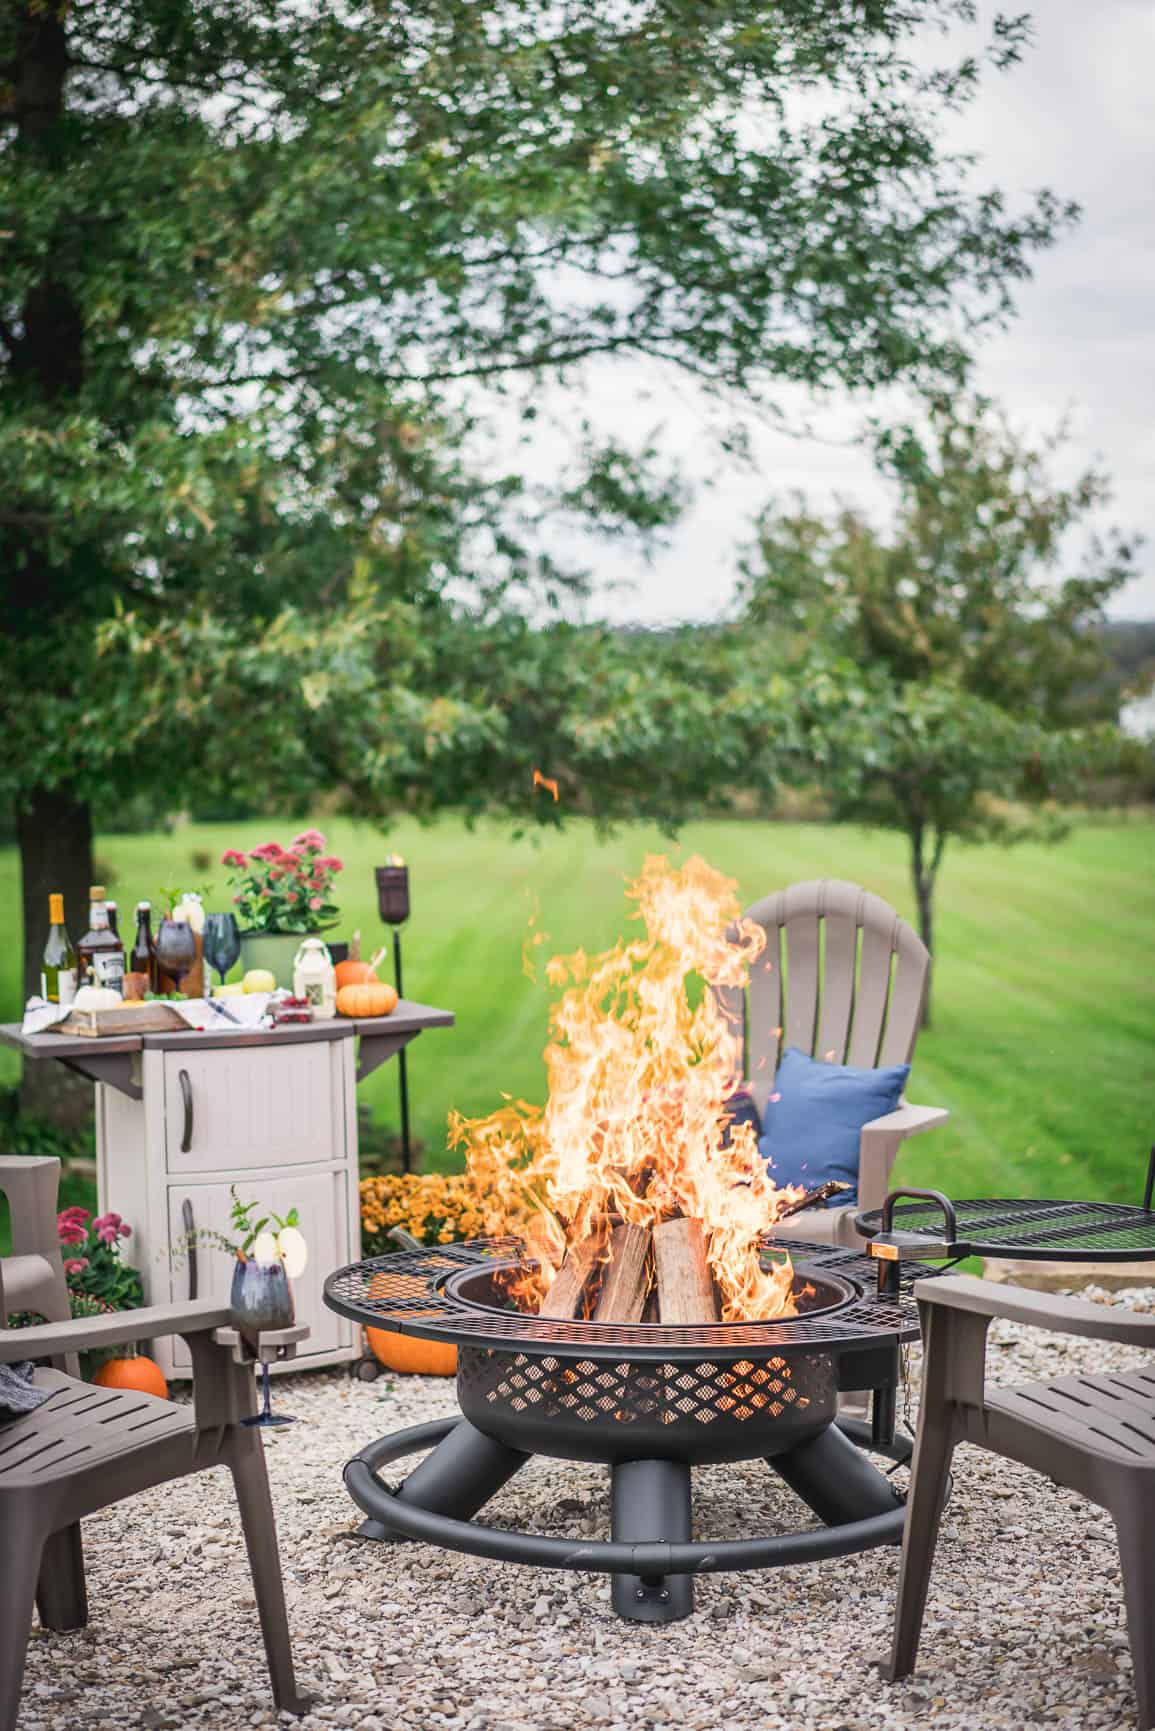 How to Set Up the Perfect Backyard Fire pit!